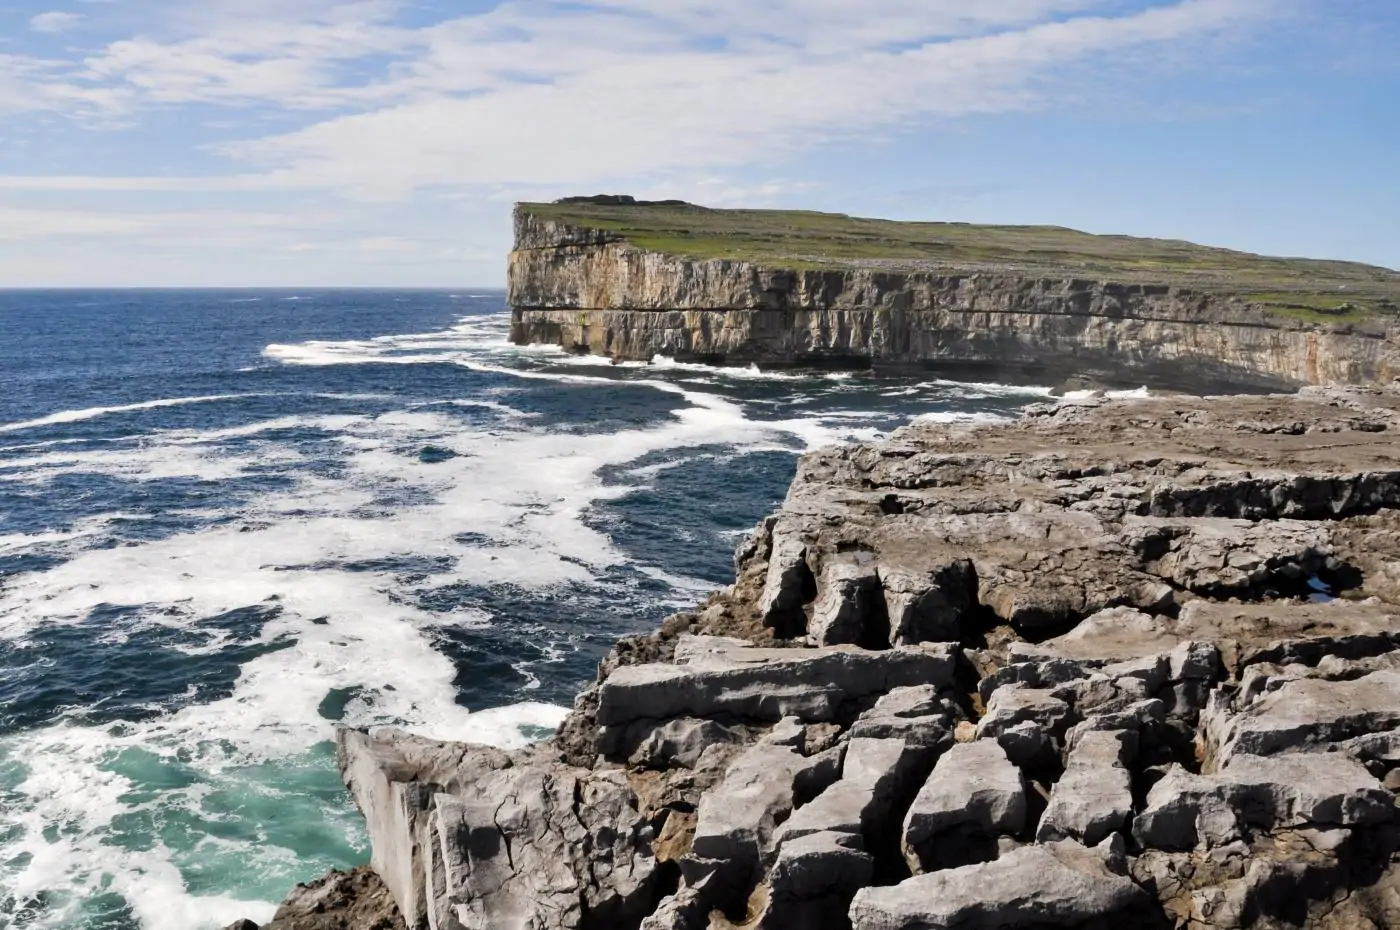 Cliffs of Inishmore the largest Aran Island